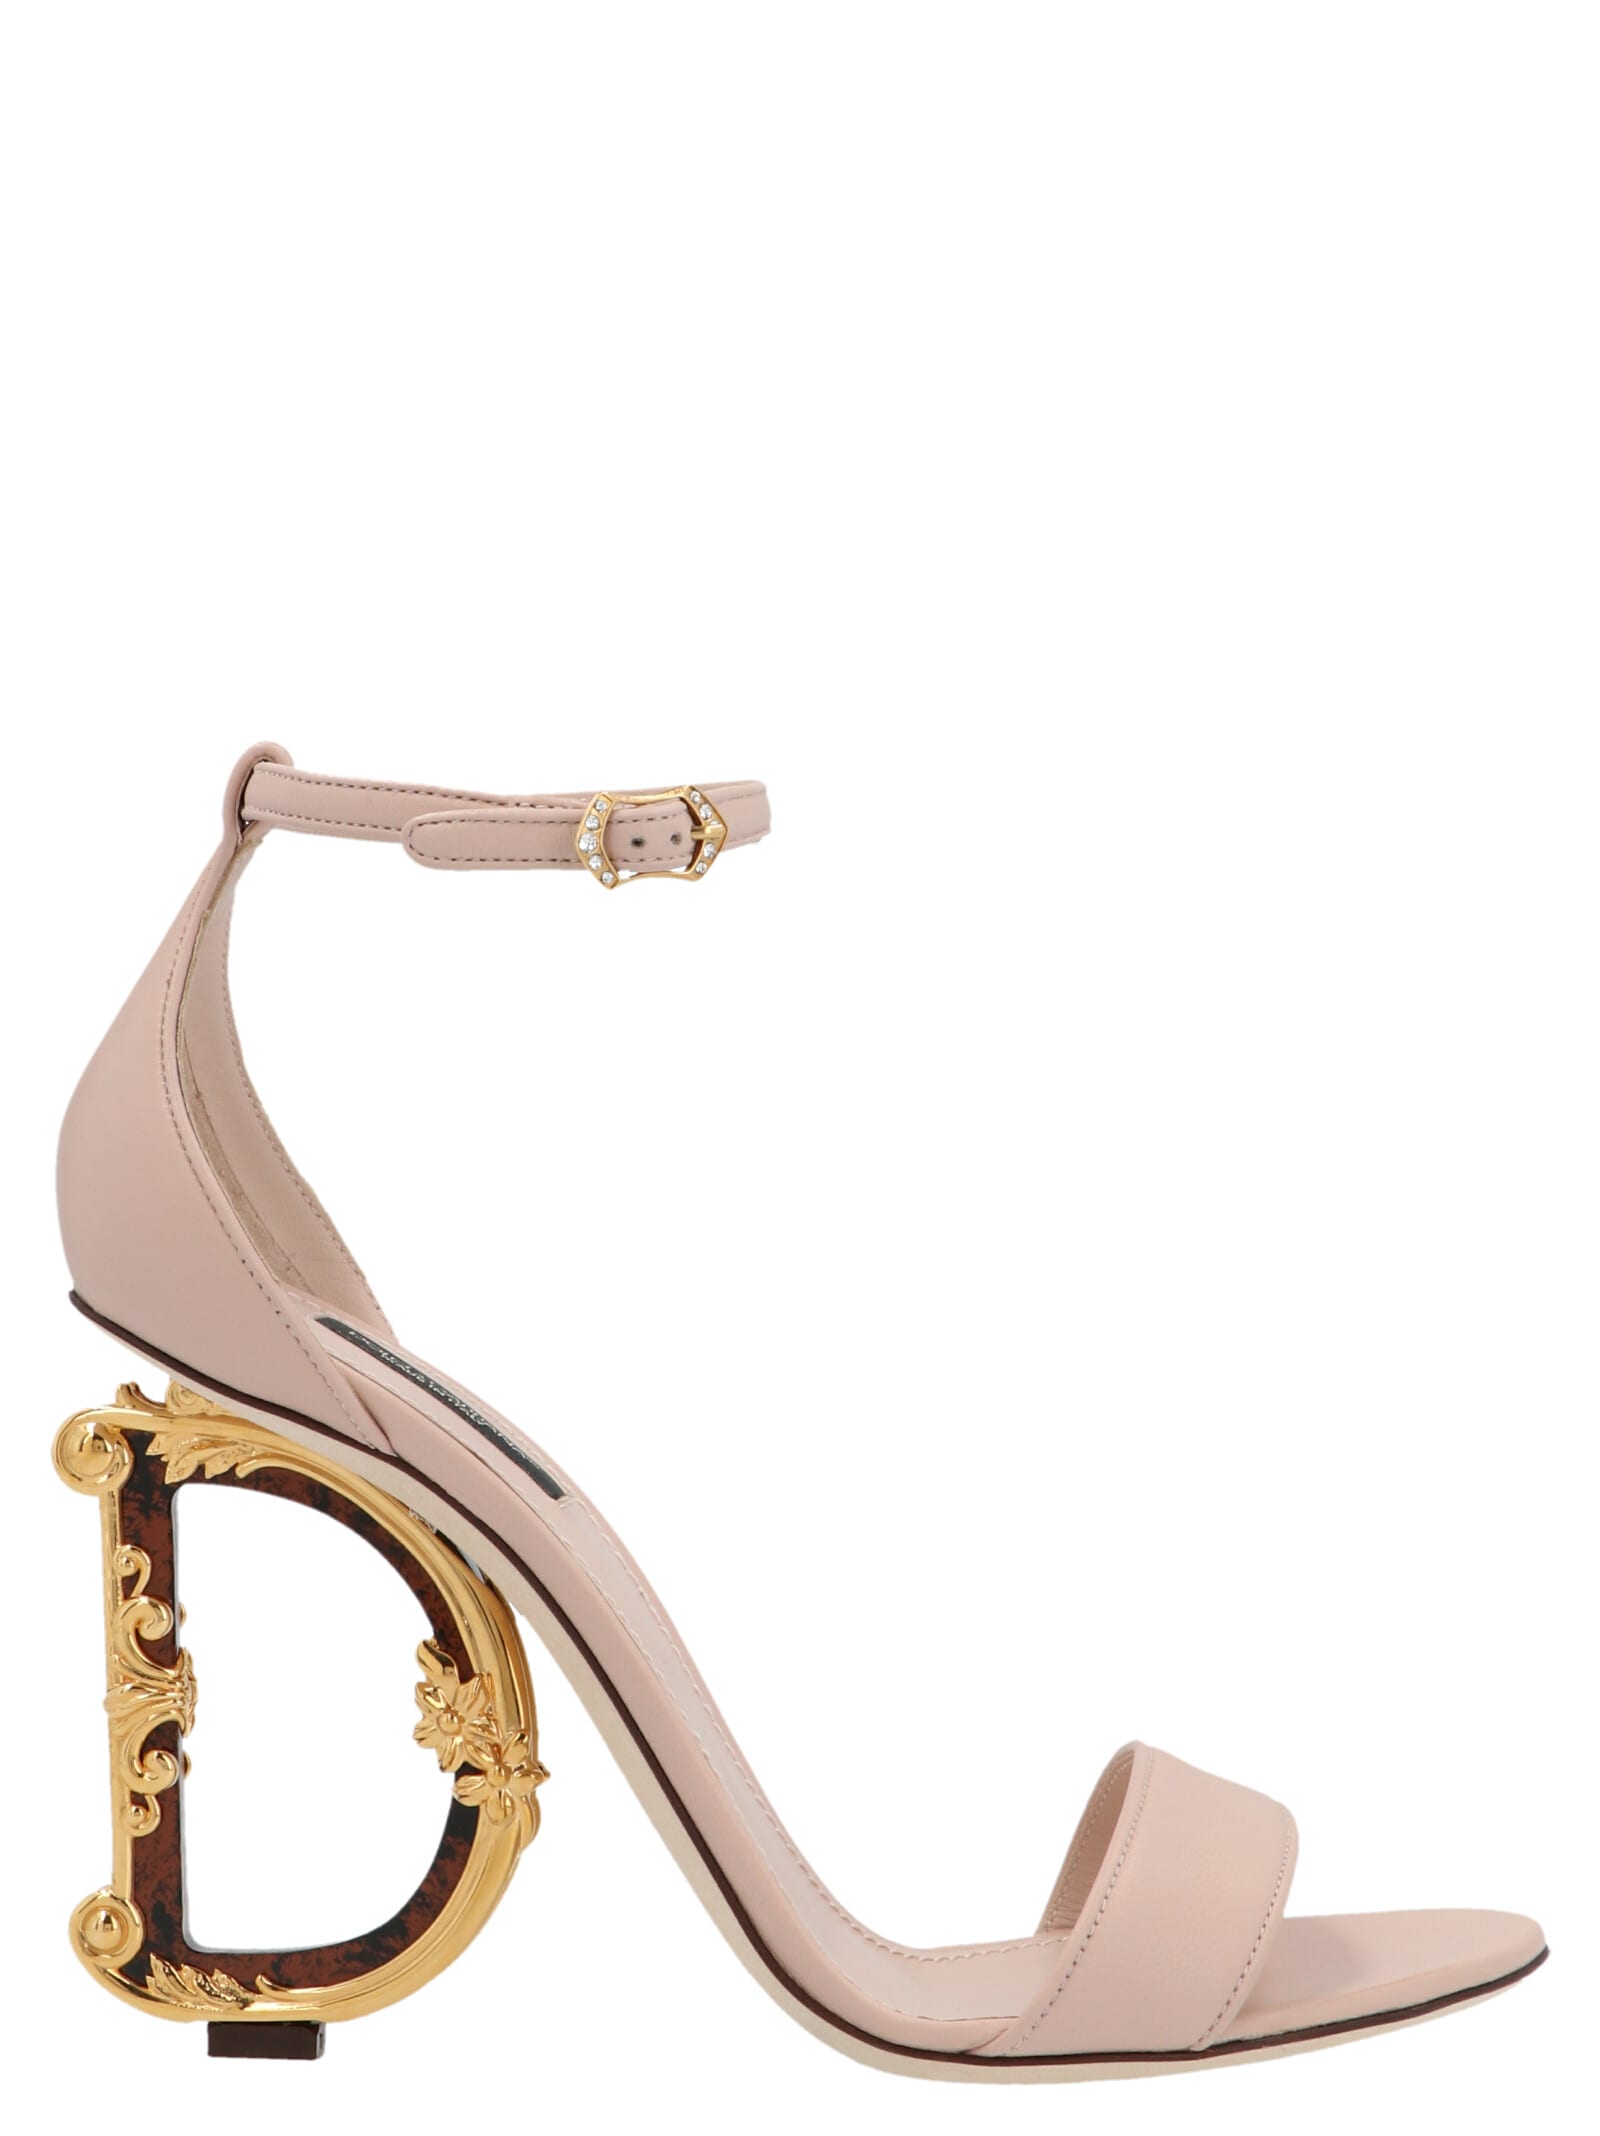 Dolce & Gabbana Devotion Shoes In Pink